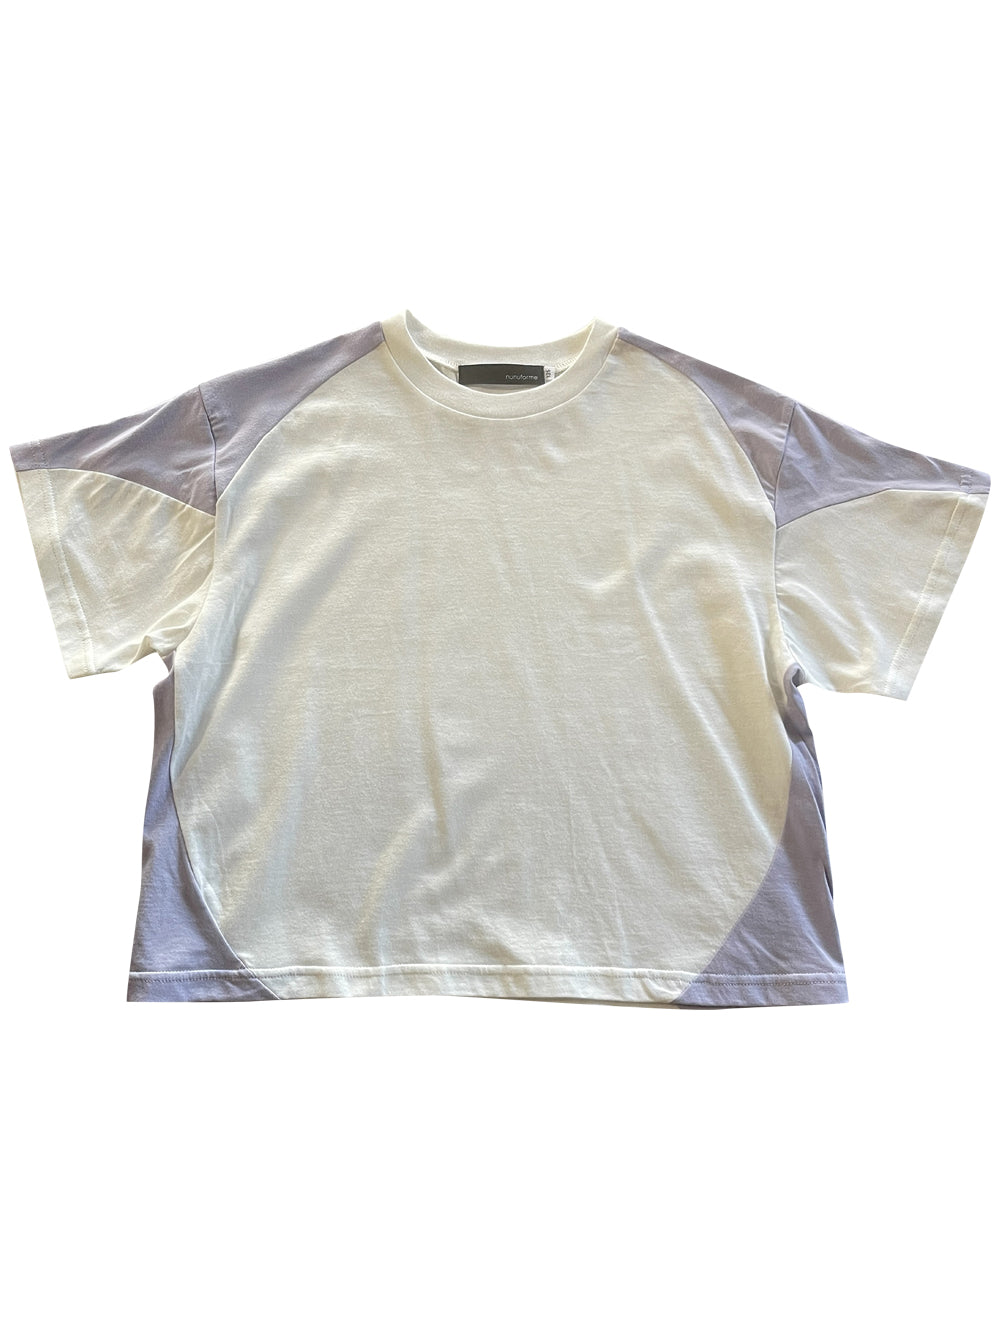 Off White and Lilac T-Shirt